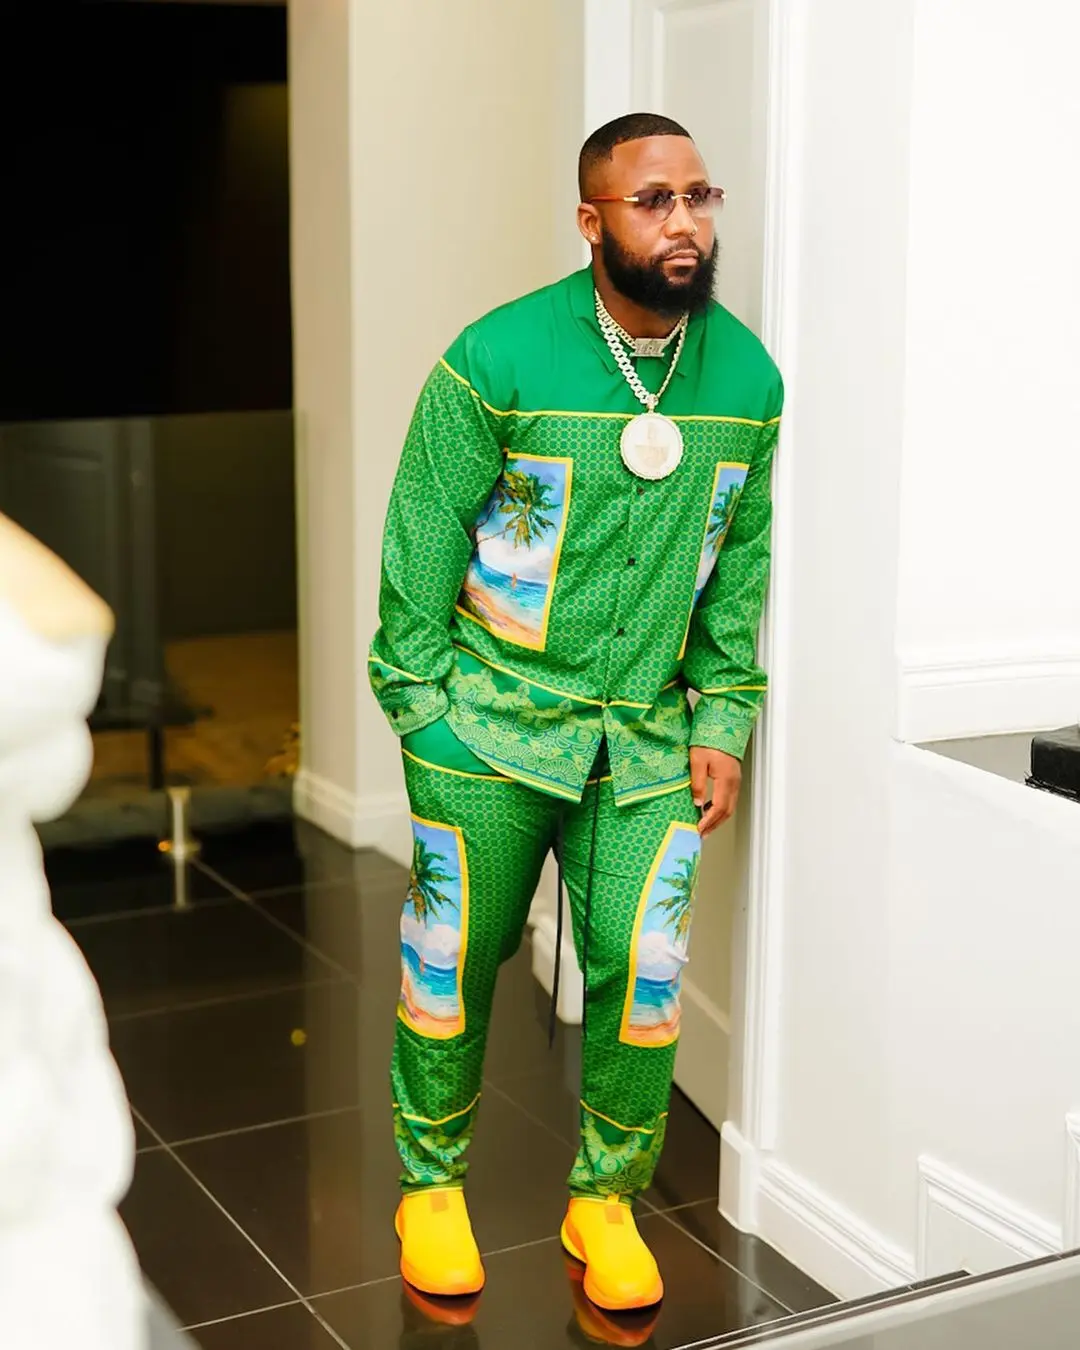 Cassper Nyovest has announced his new music release date